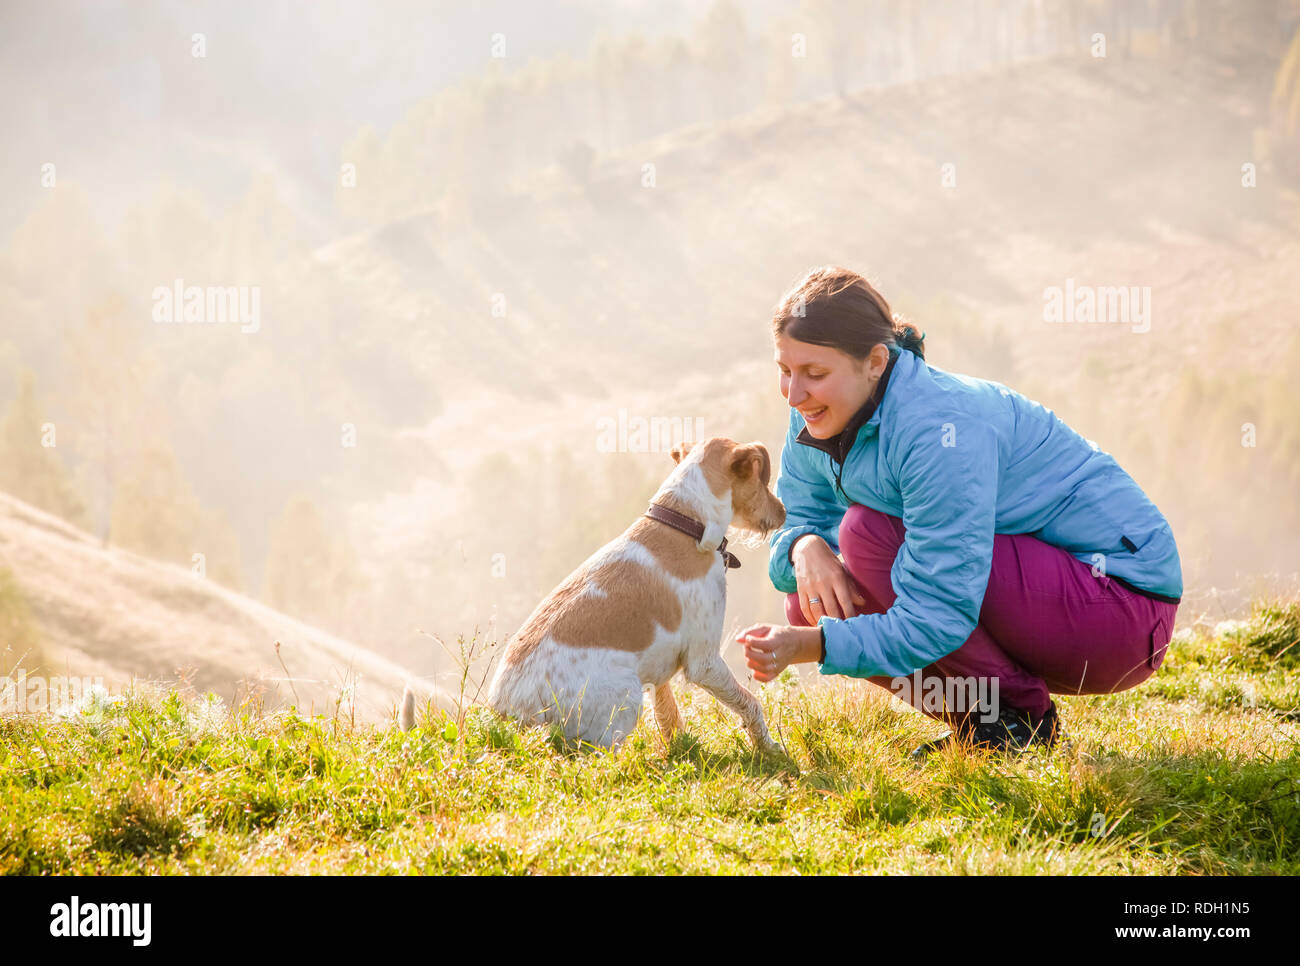 woman playing with her dog in beautiful mountain scenery in spring Stock Photo